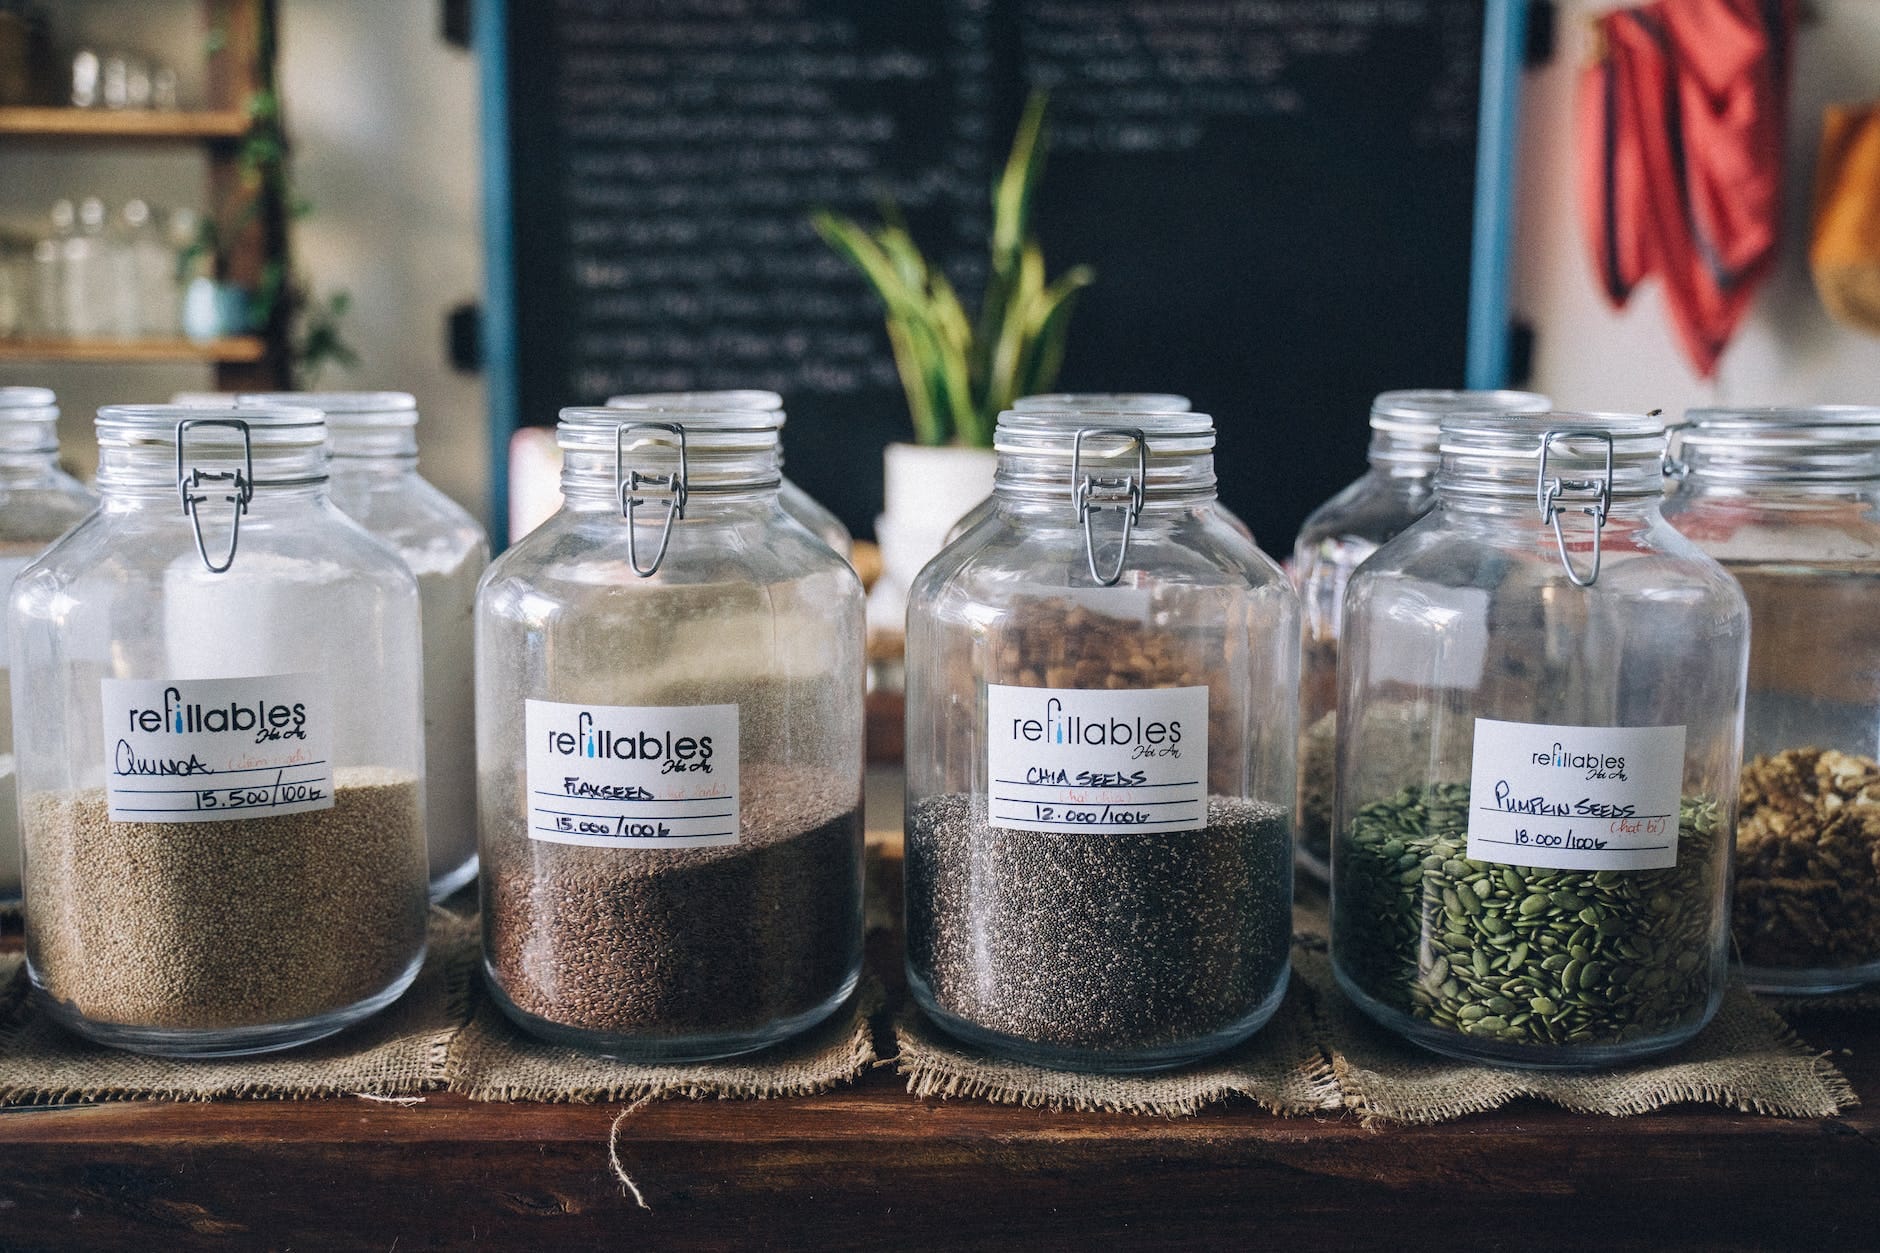 assorted seeds in glass jar containers - mindful consumption 